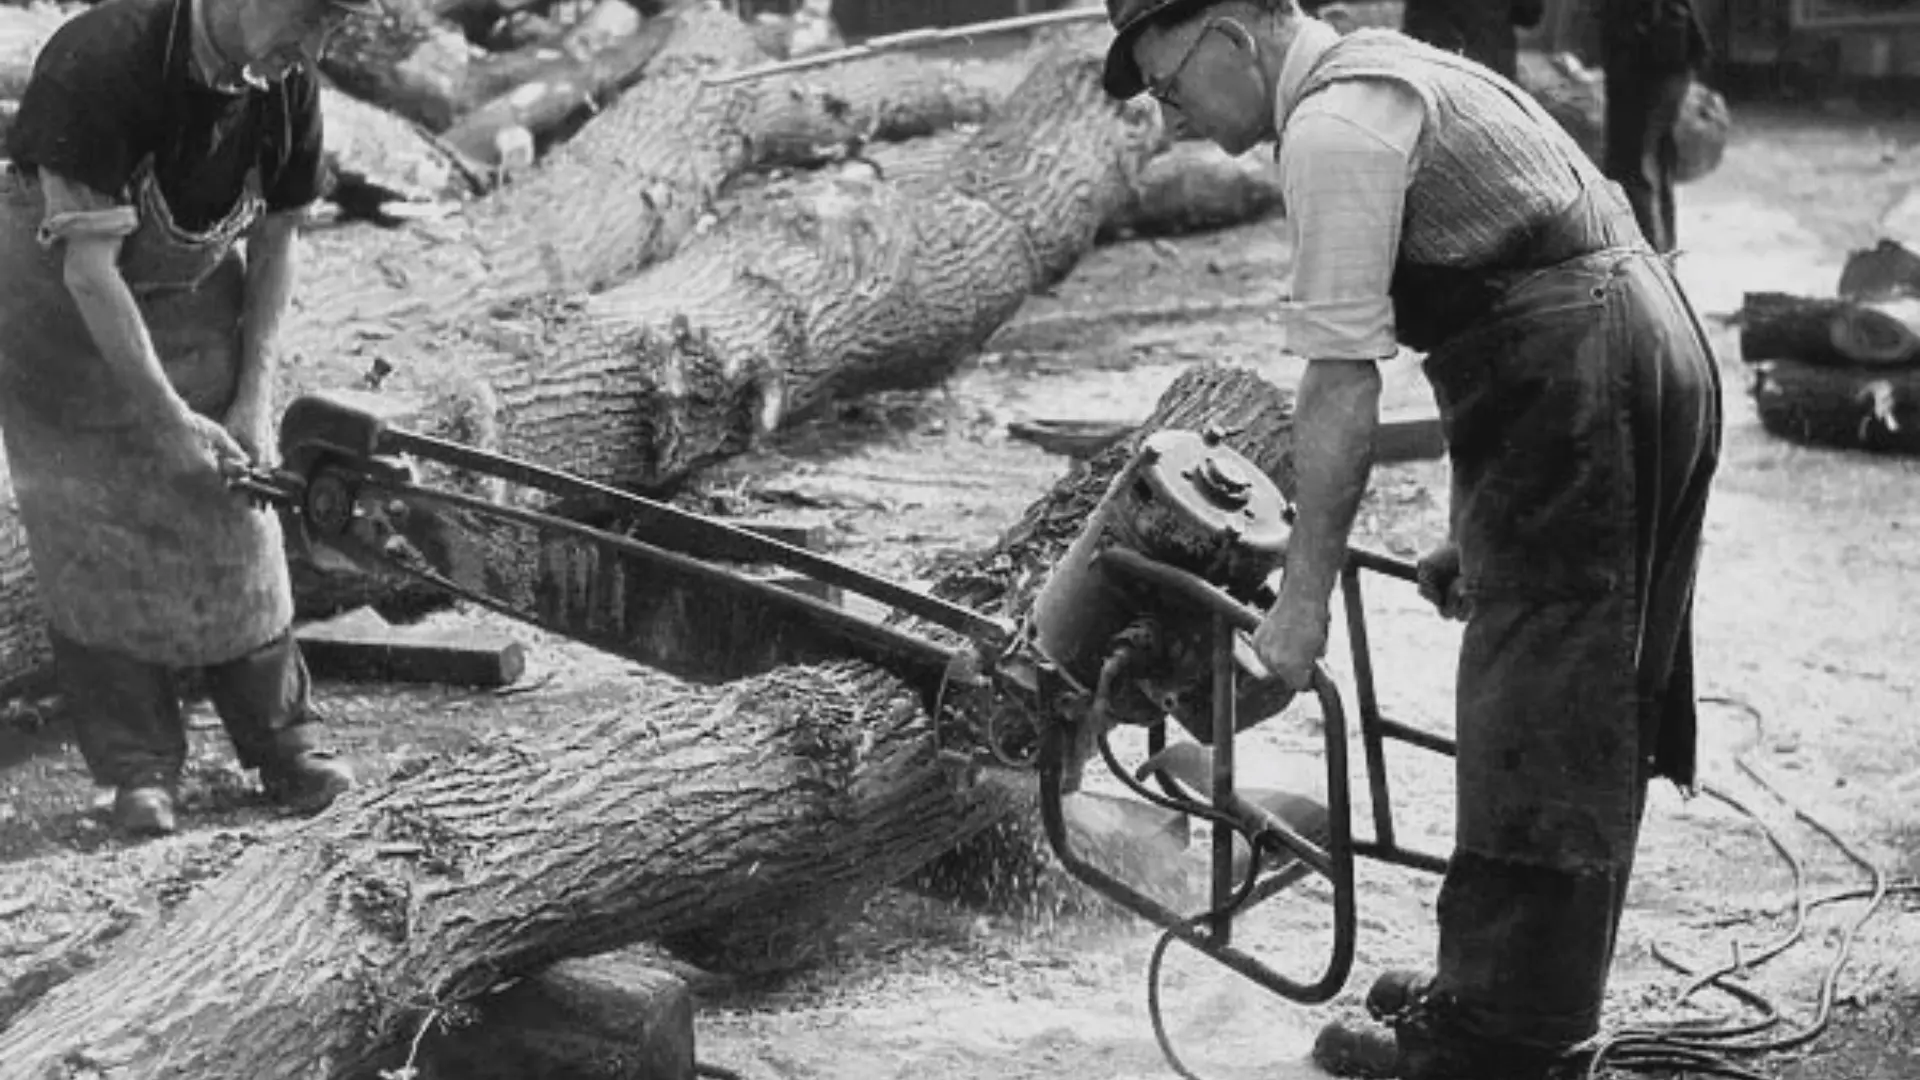 Evolution of Chainsaws during the 20th Century